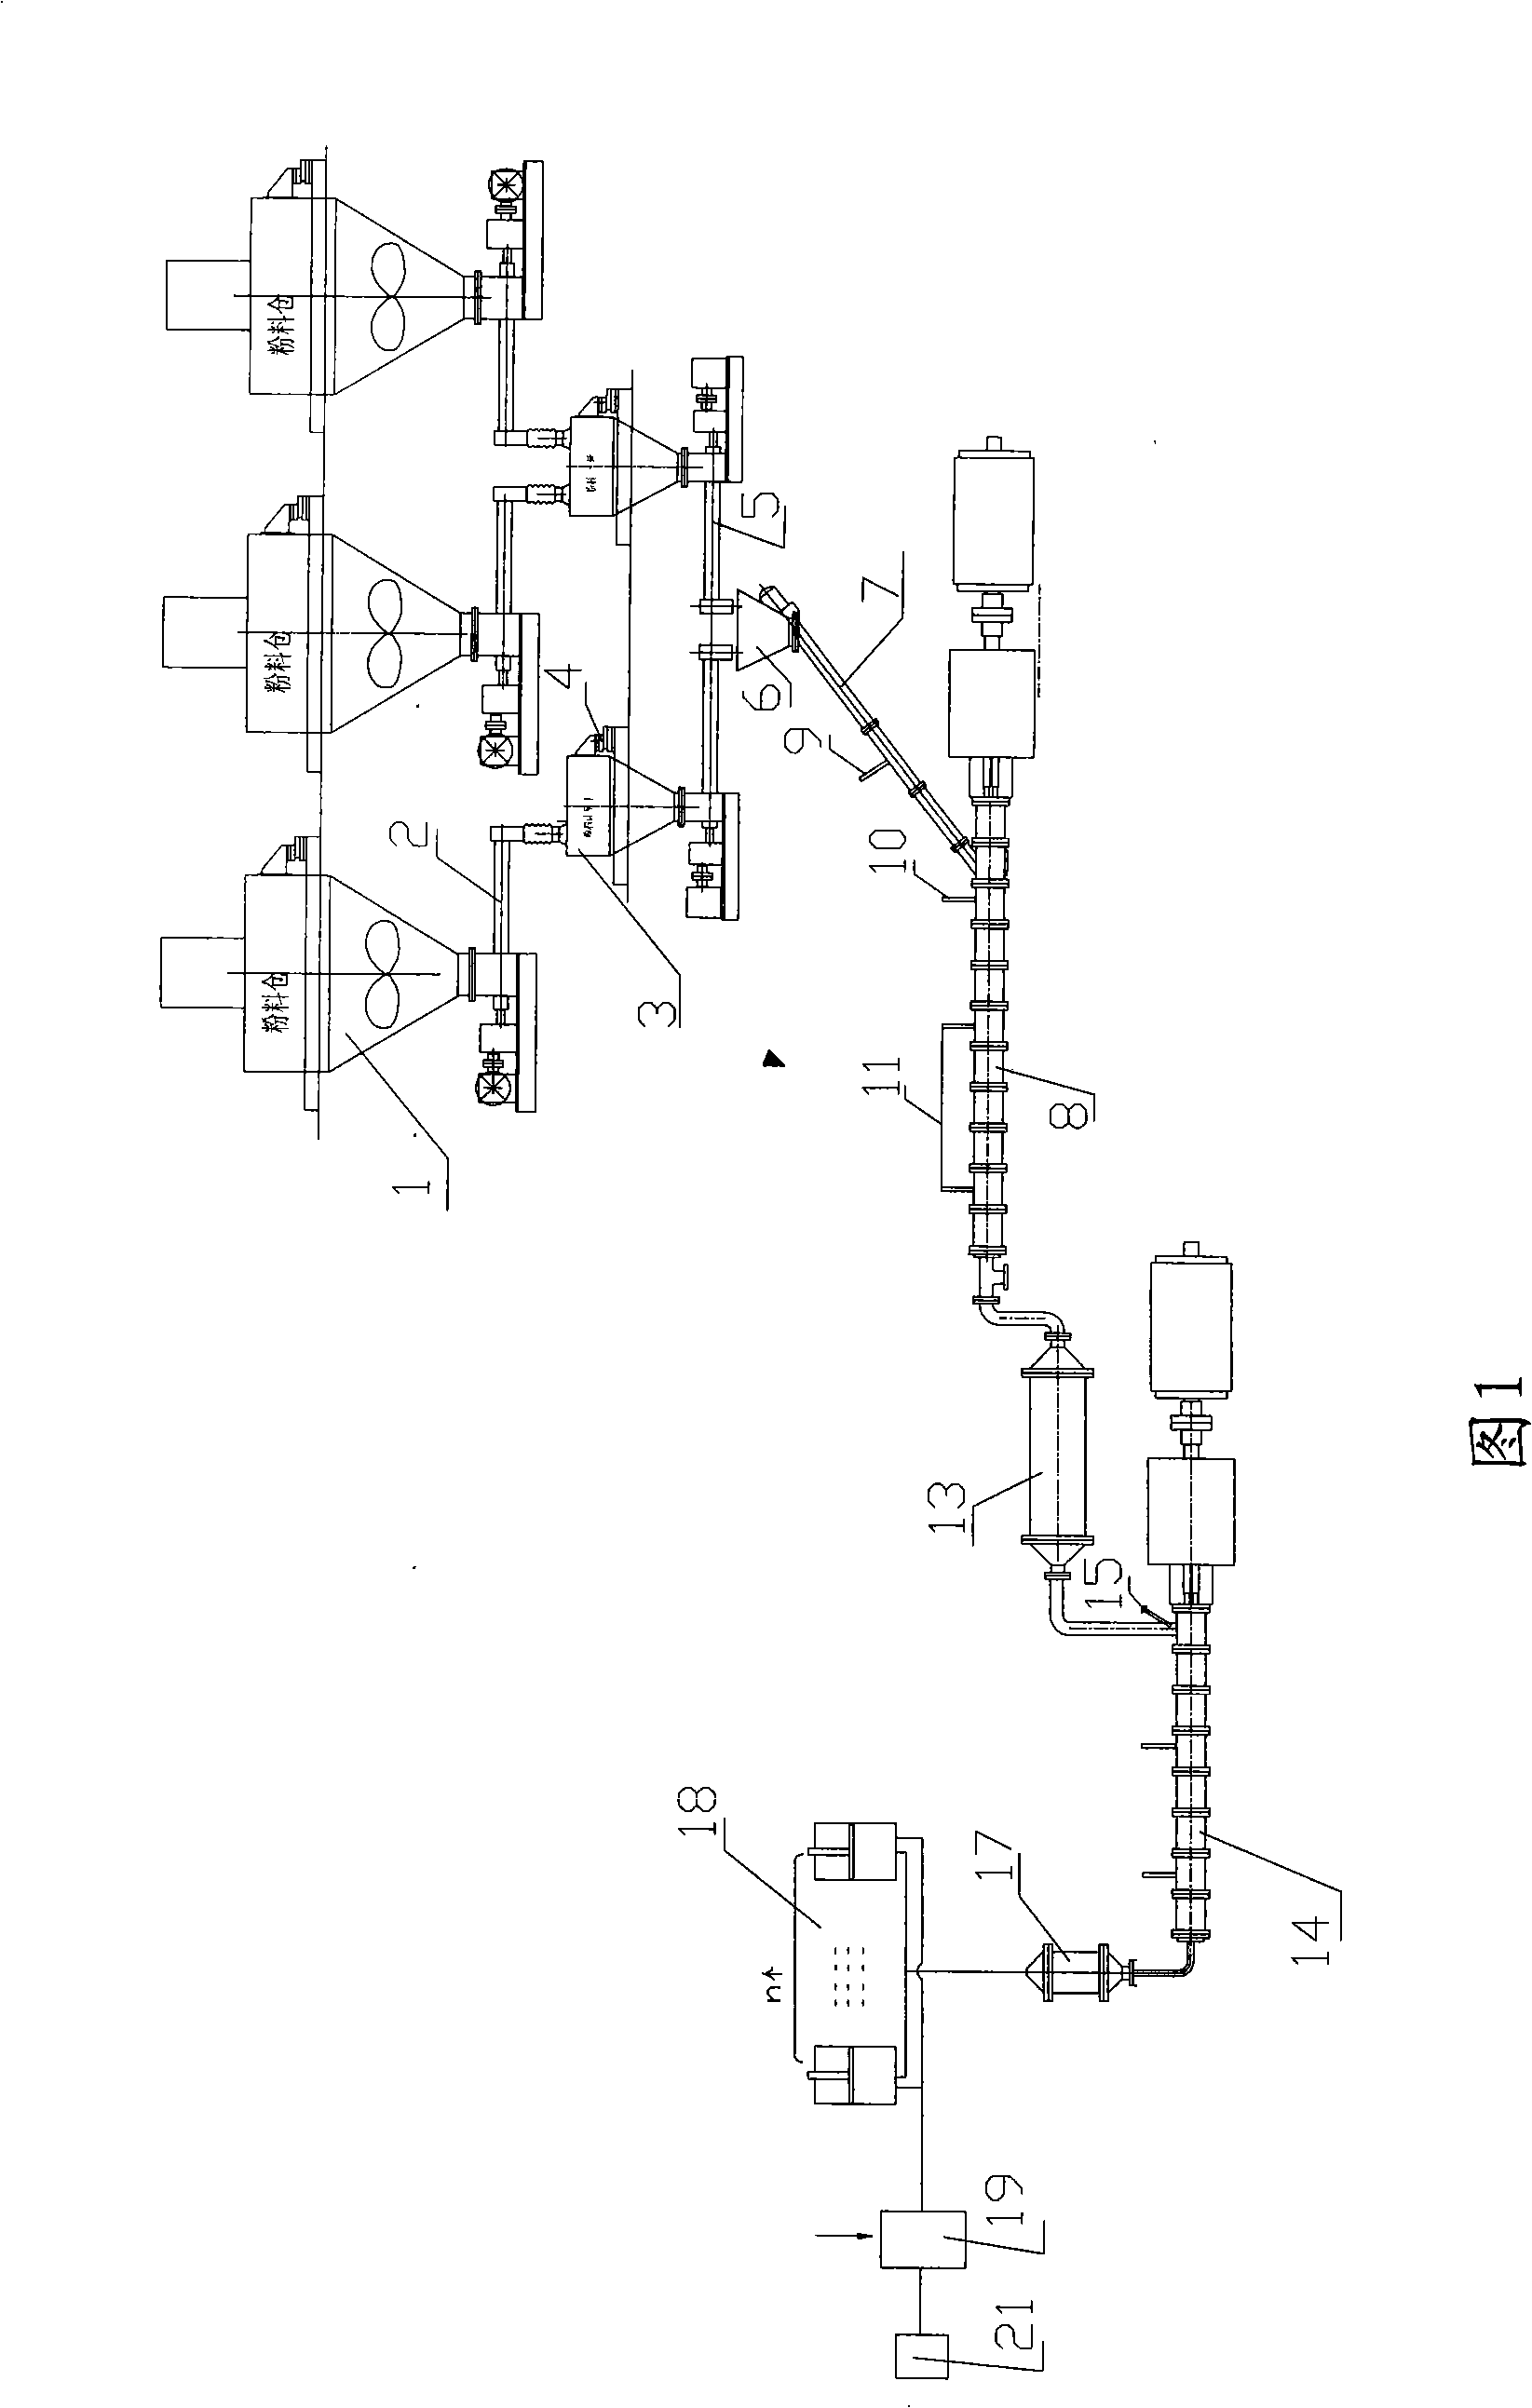 Production process for full-sealing automatic production line for fluid sealant for construction